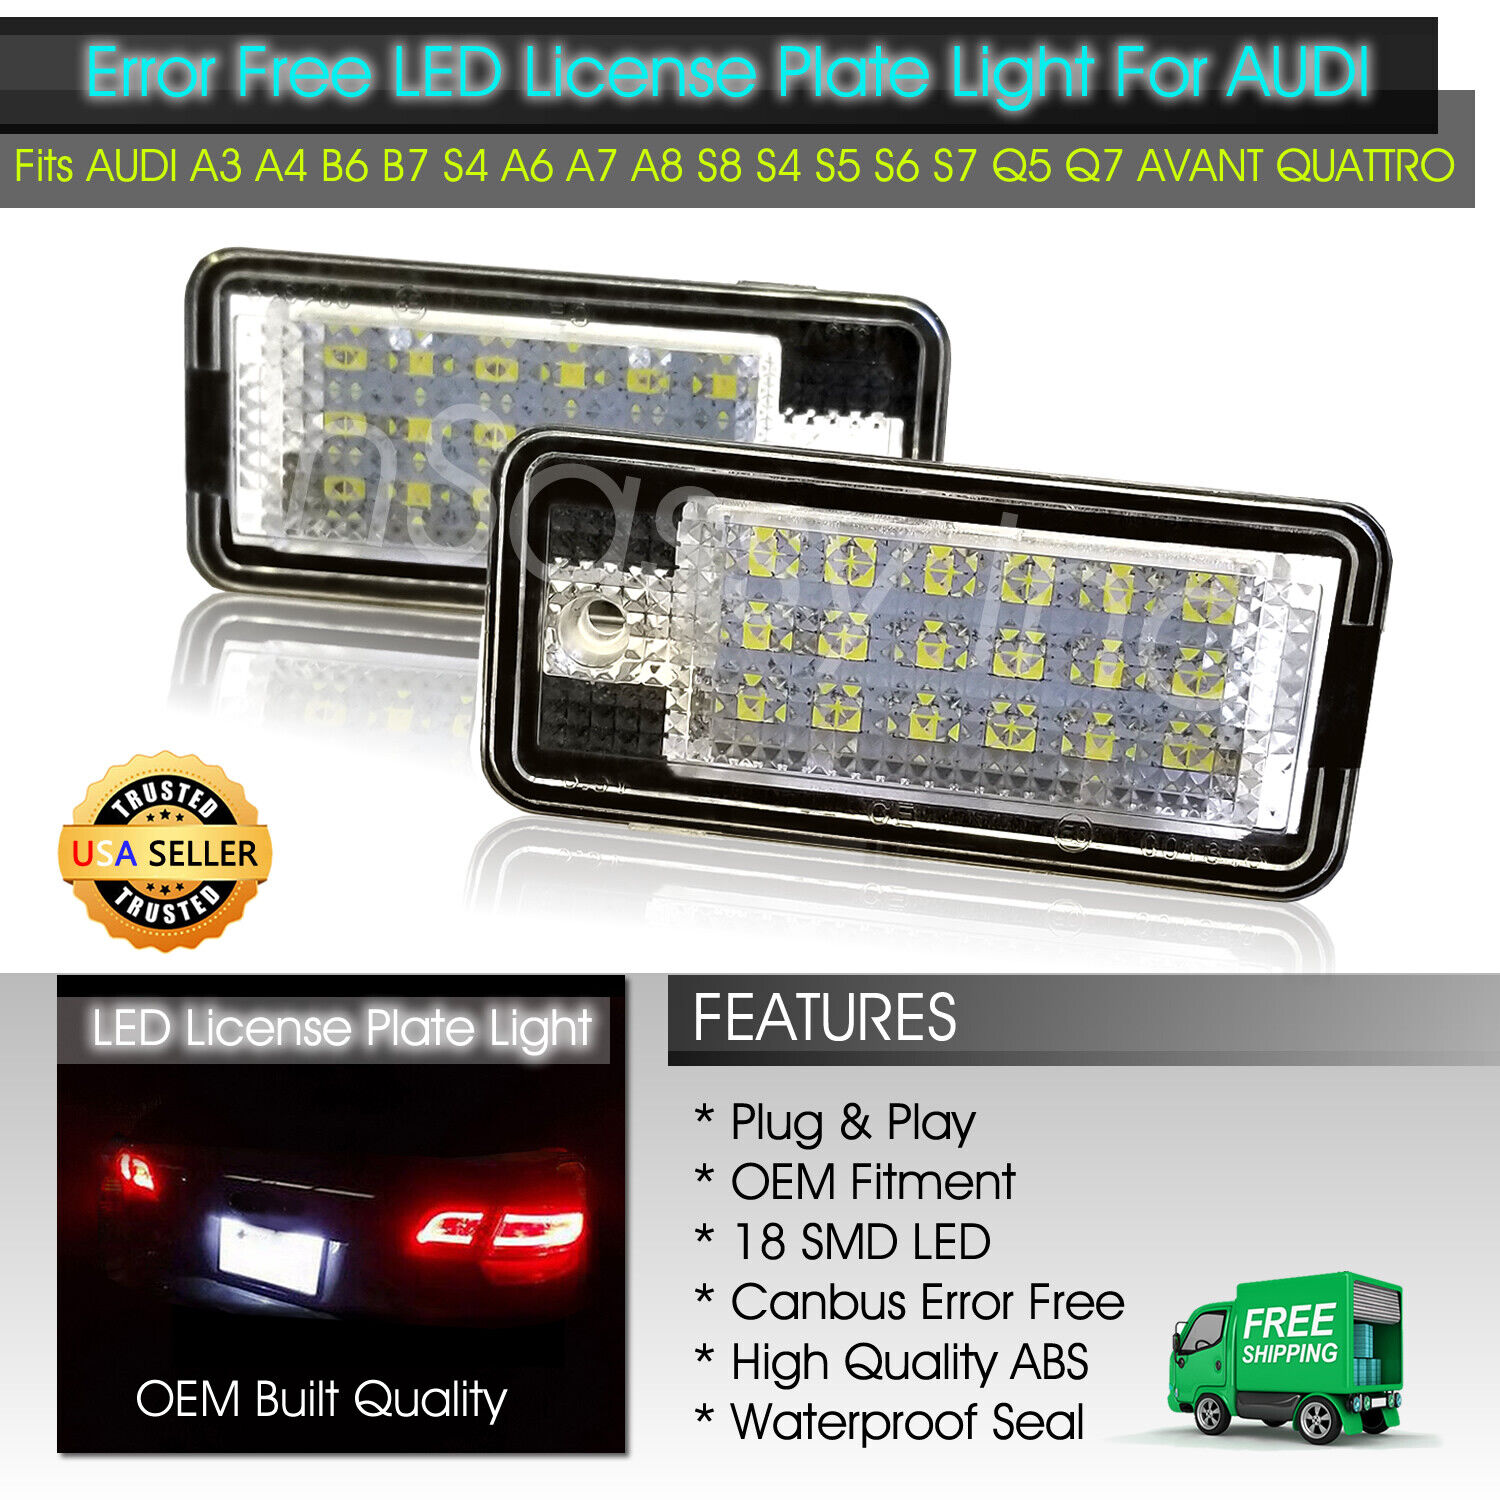 LED License Plate Lights Replacement for Audi A3 A4 S4 A6 A8 Q7 Quattro Canbus